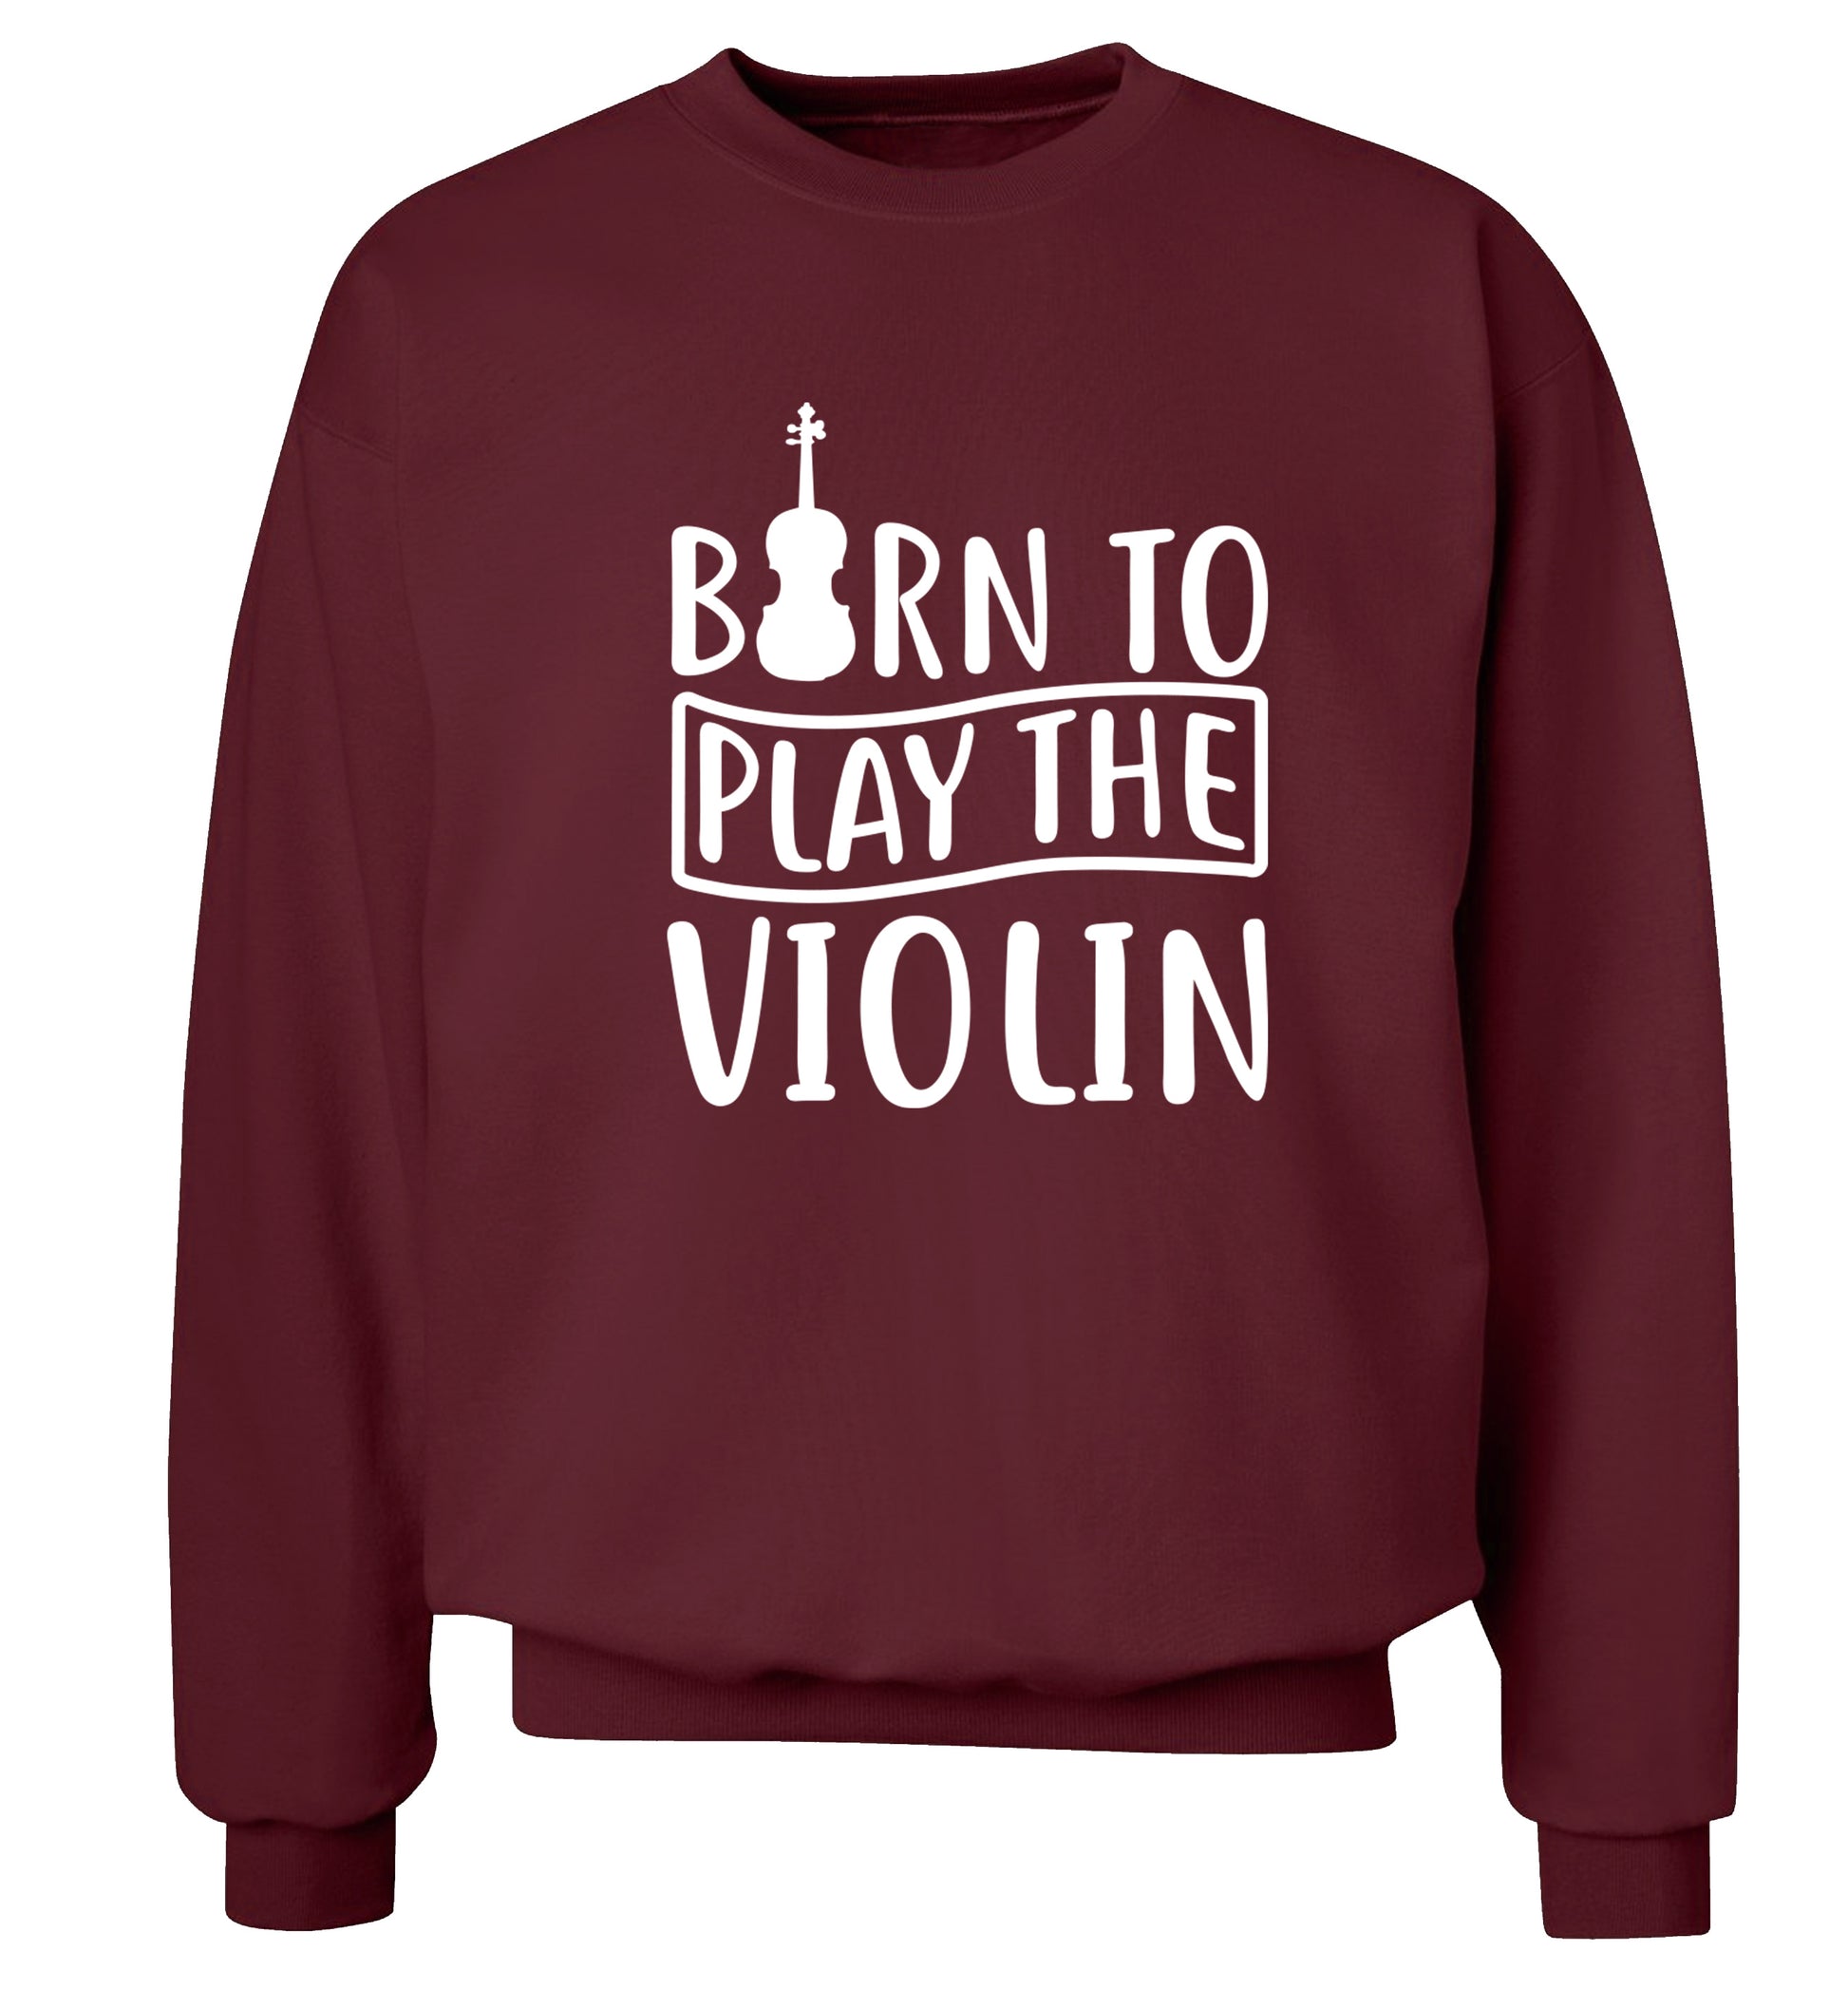 Born to Play the Violin Adult's unisex maroon Sweater 2XL